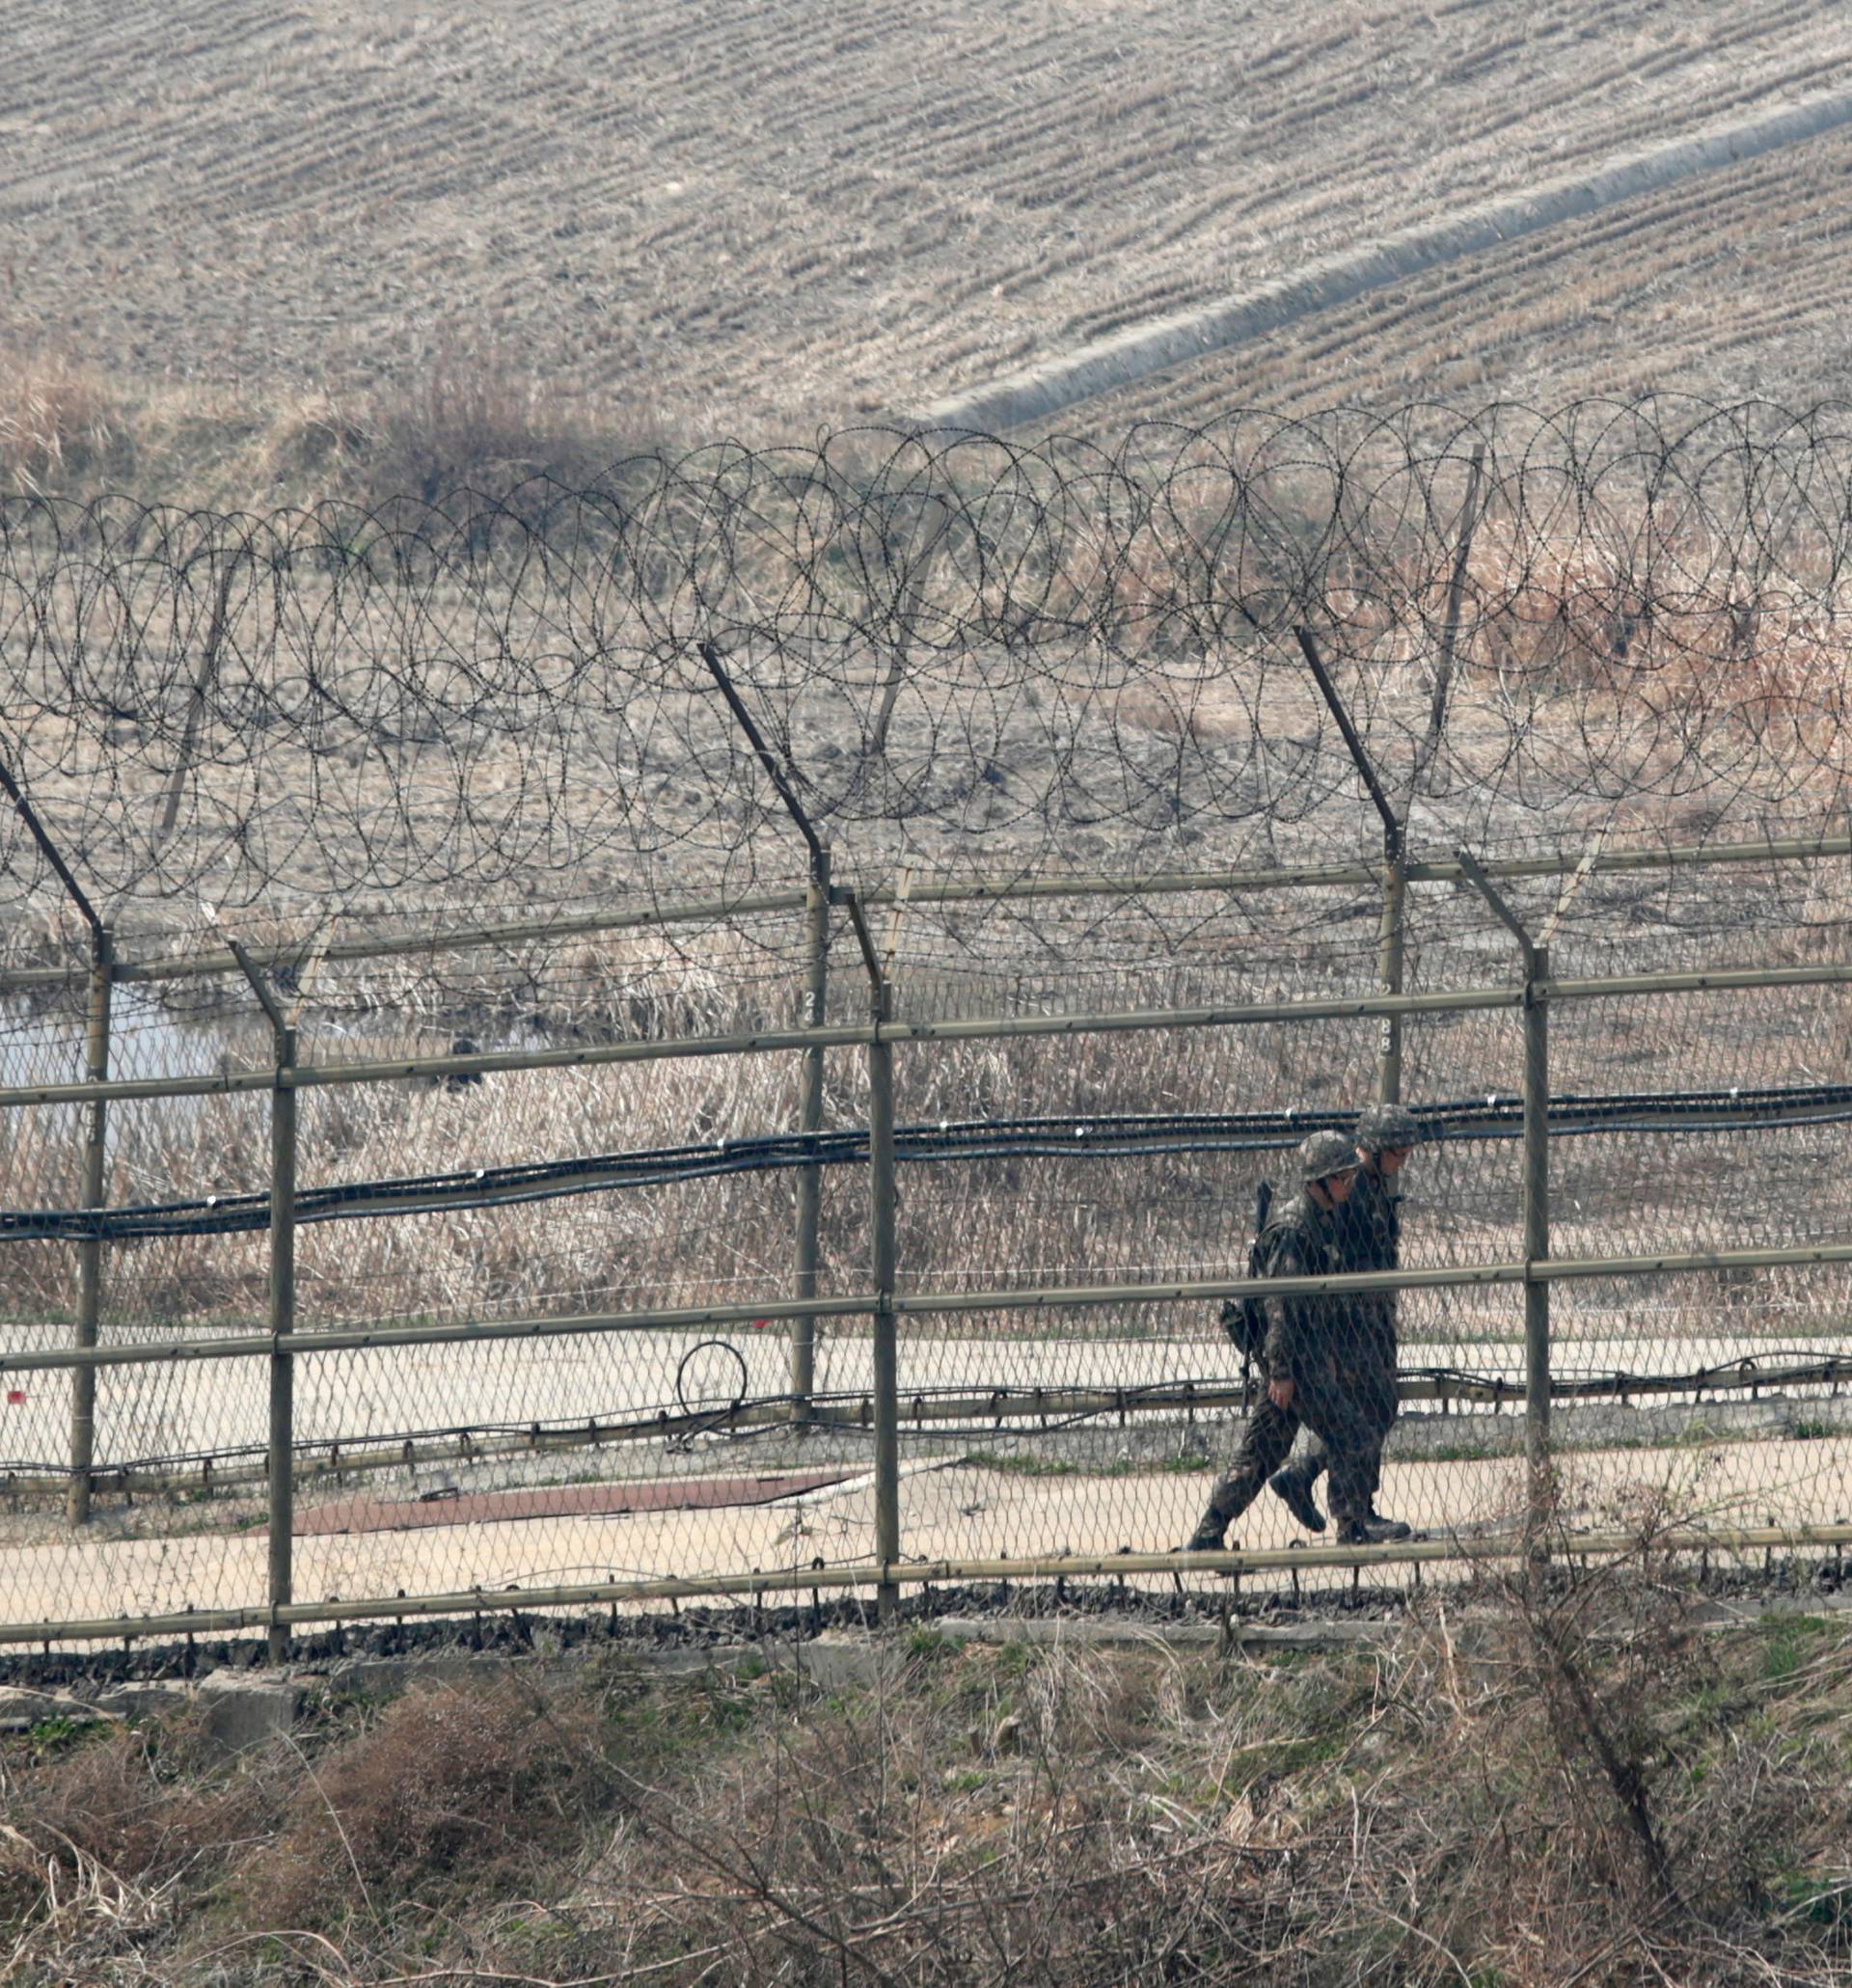 Paju, South Korea. 1st April 2014. South Korean soldiers patrol along the military fences near DMZ, Paju, South Korea, on Tuesday April 1, 2014. North and South Koreas exchanged artillery fire across the western maritime border, the Northern Limit Line (N